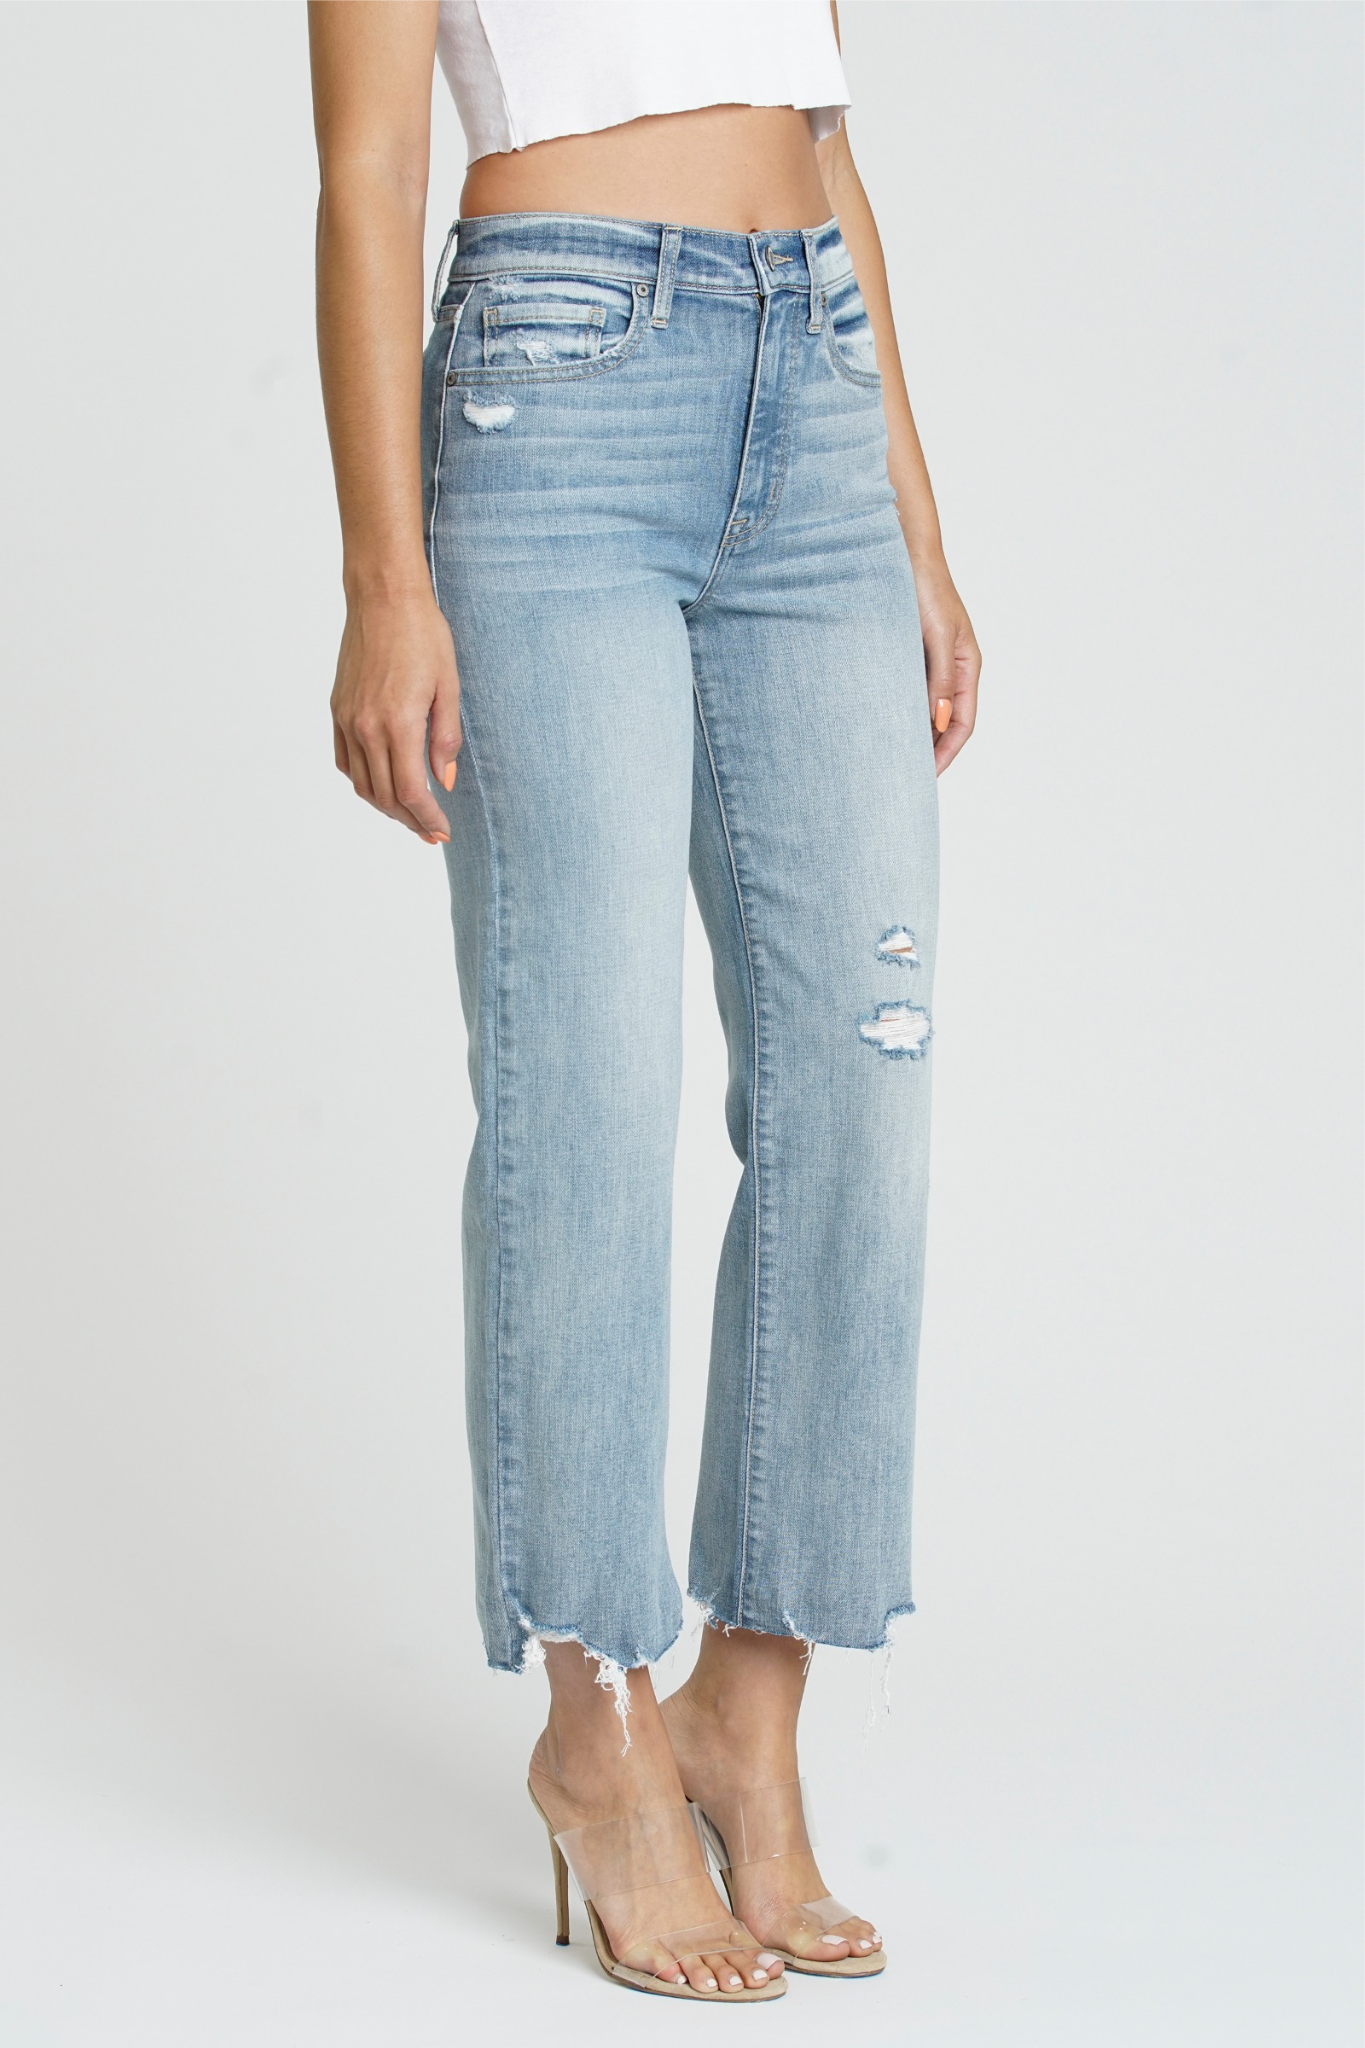 Eunina Dawn Wide Leg Jeans in New Moon Side View